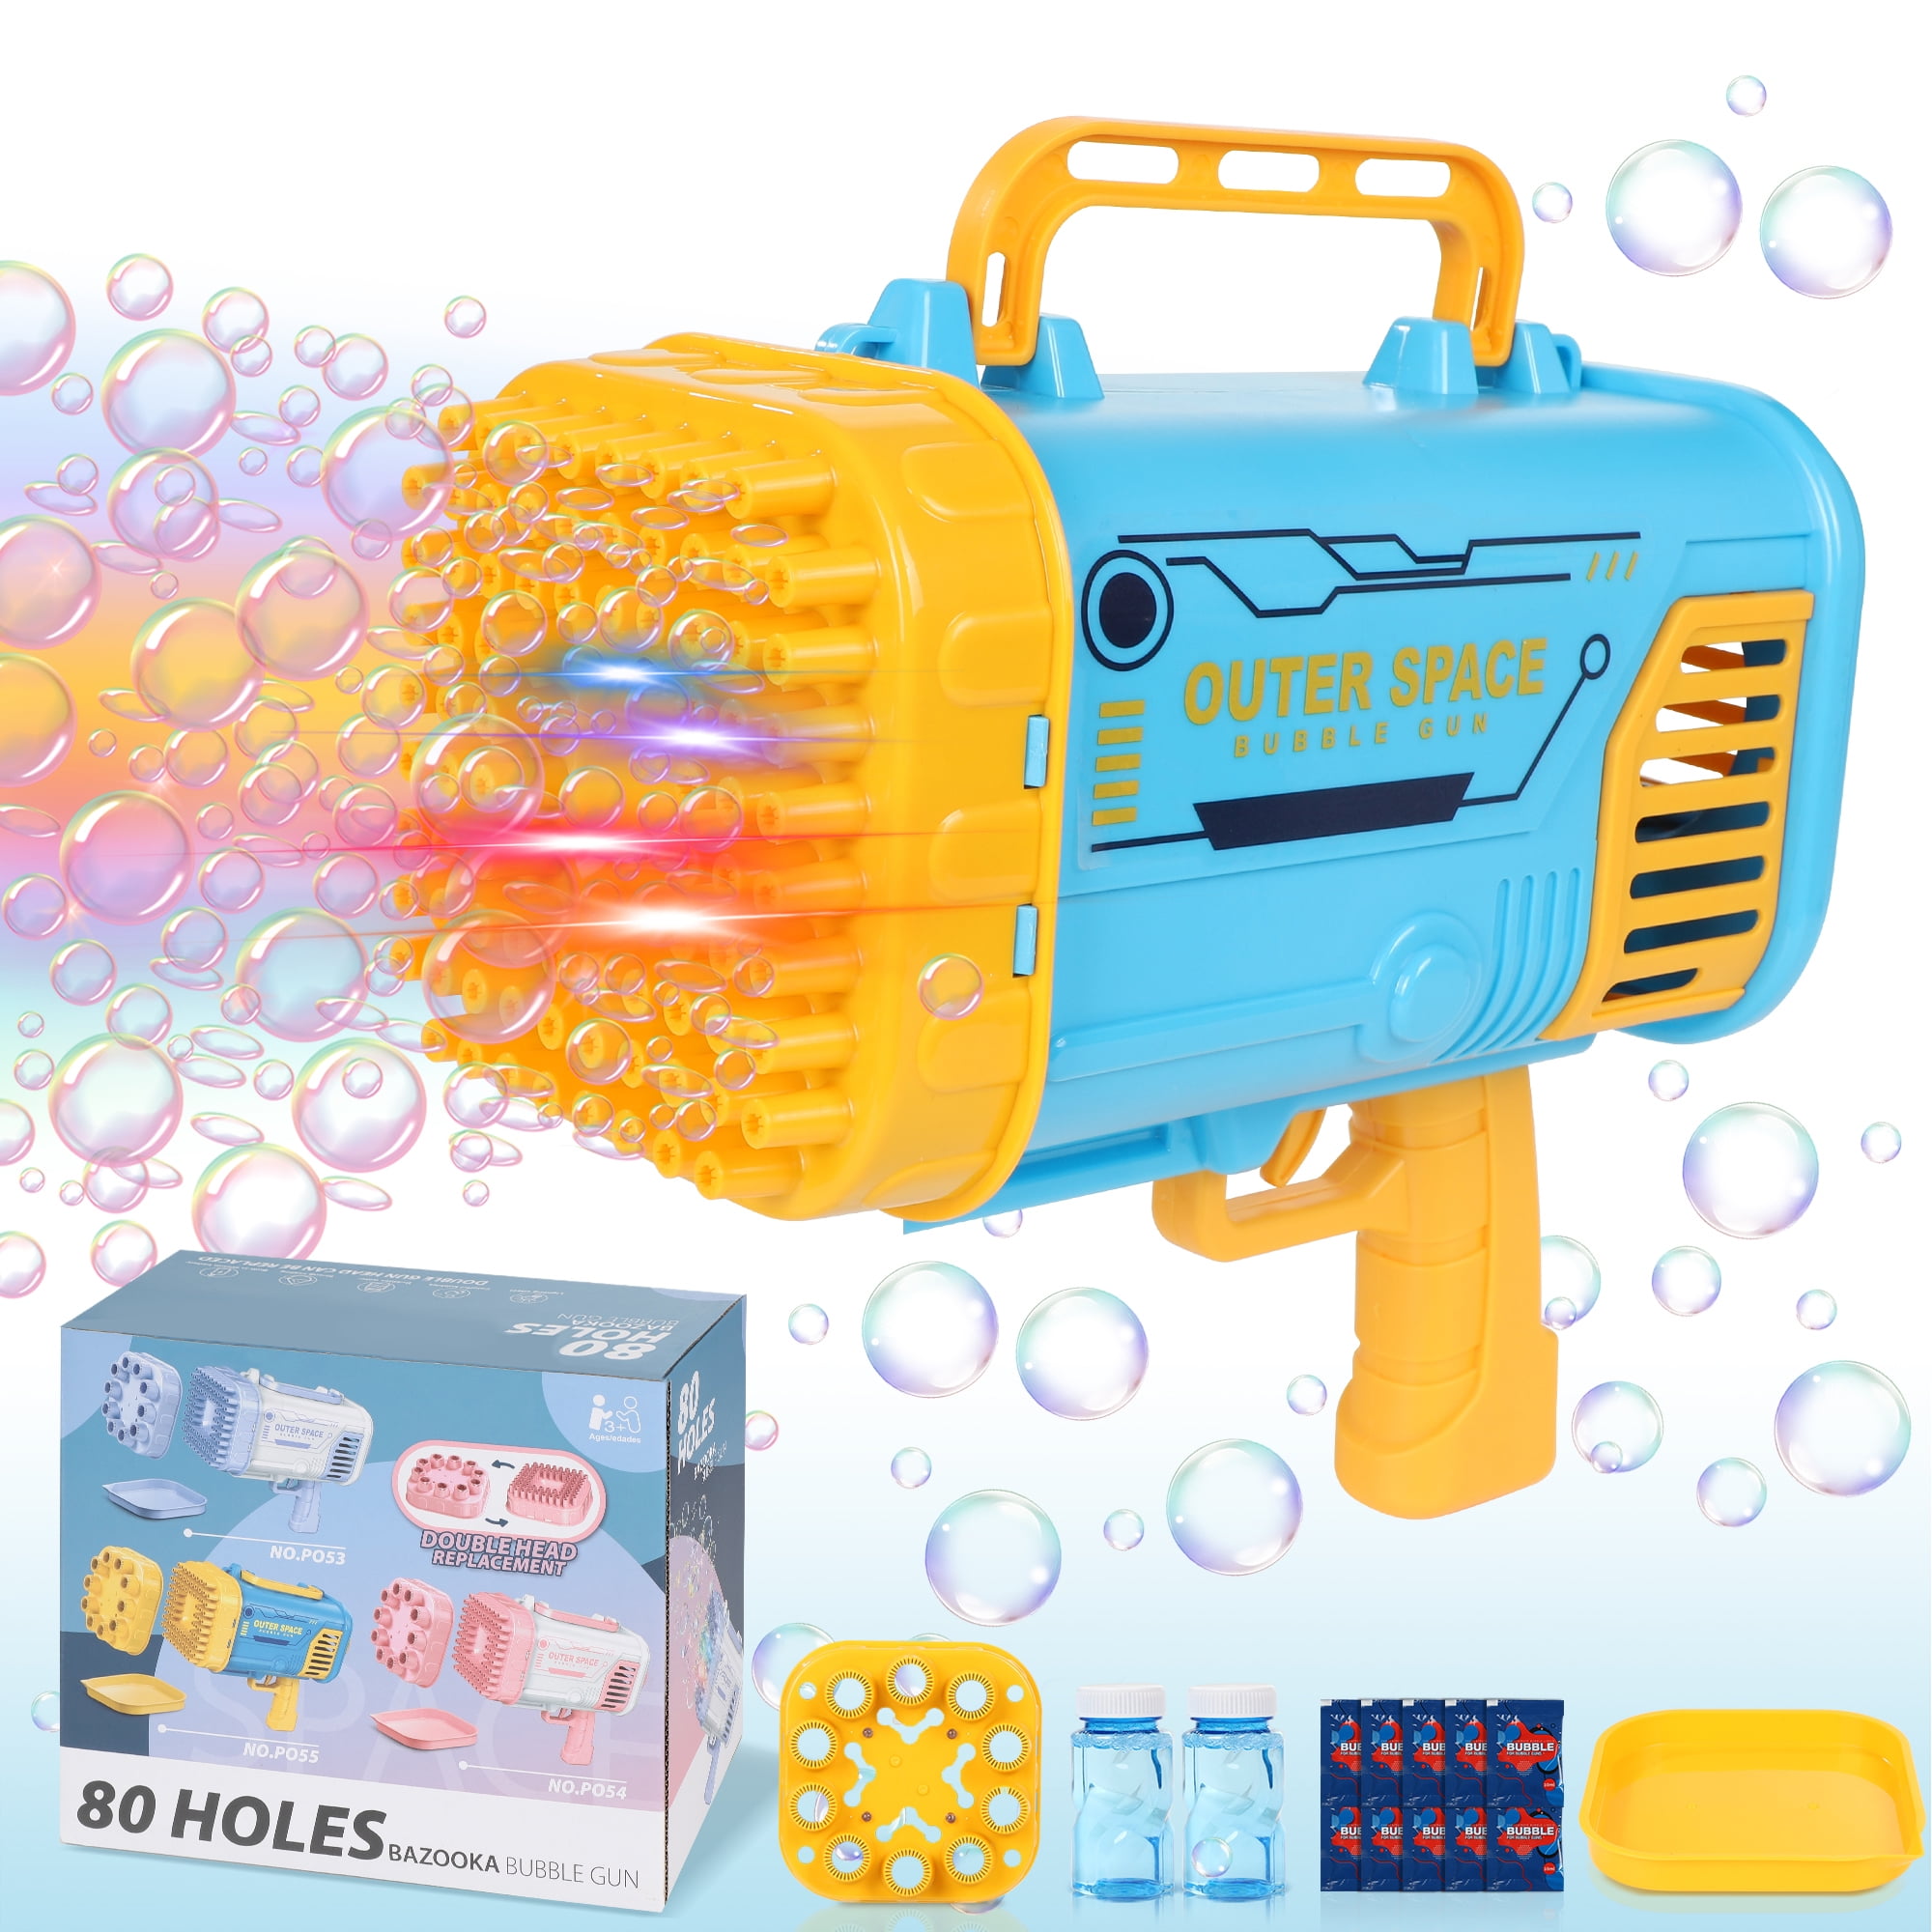  Bubble Machine Bubble Gun 69 Holes with Colorful Lights and  Bubble Solution, Bubble Blower Bubble Maker for Kids Toddlers Adults,  Birthday Christmas Toy Gift for Boys Girls Age 3 4 5